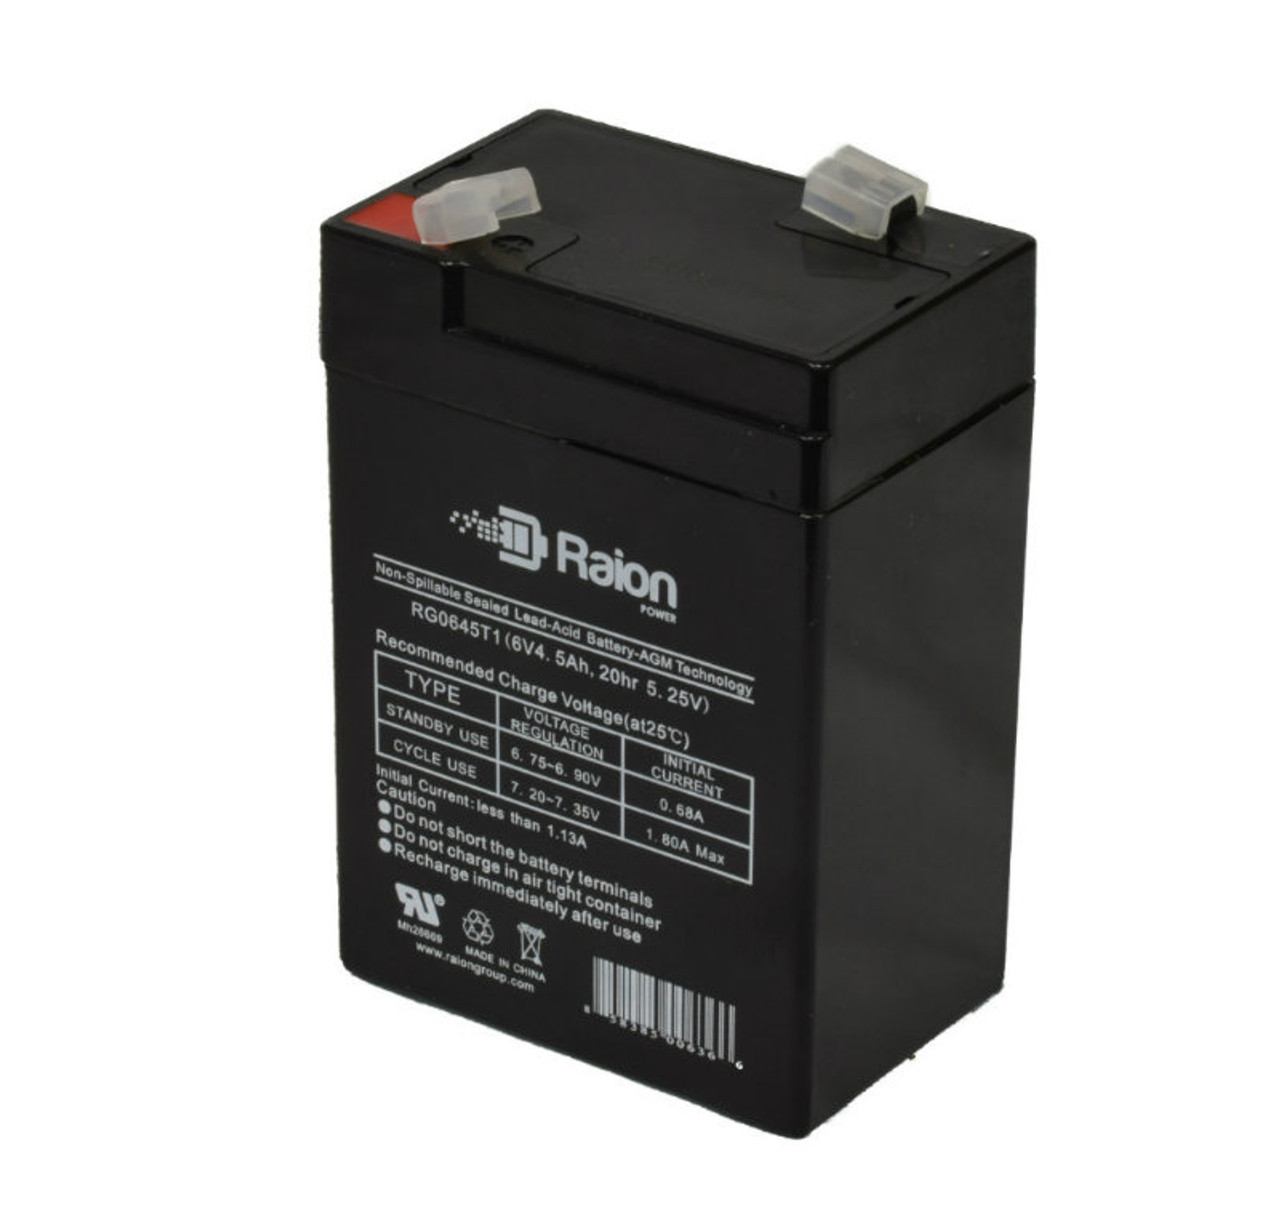 Raion Power RG0645T1 6V 4.5Ah Replacement Battery Cartridge for Safety SN640